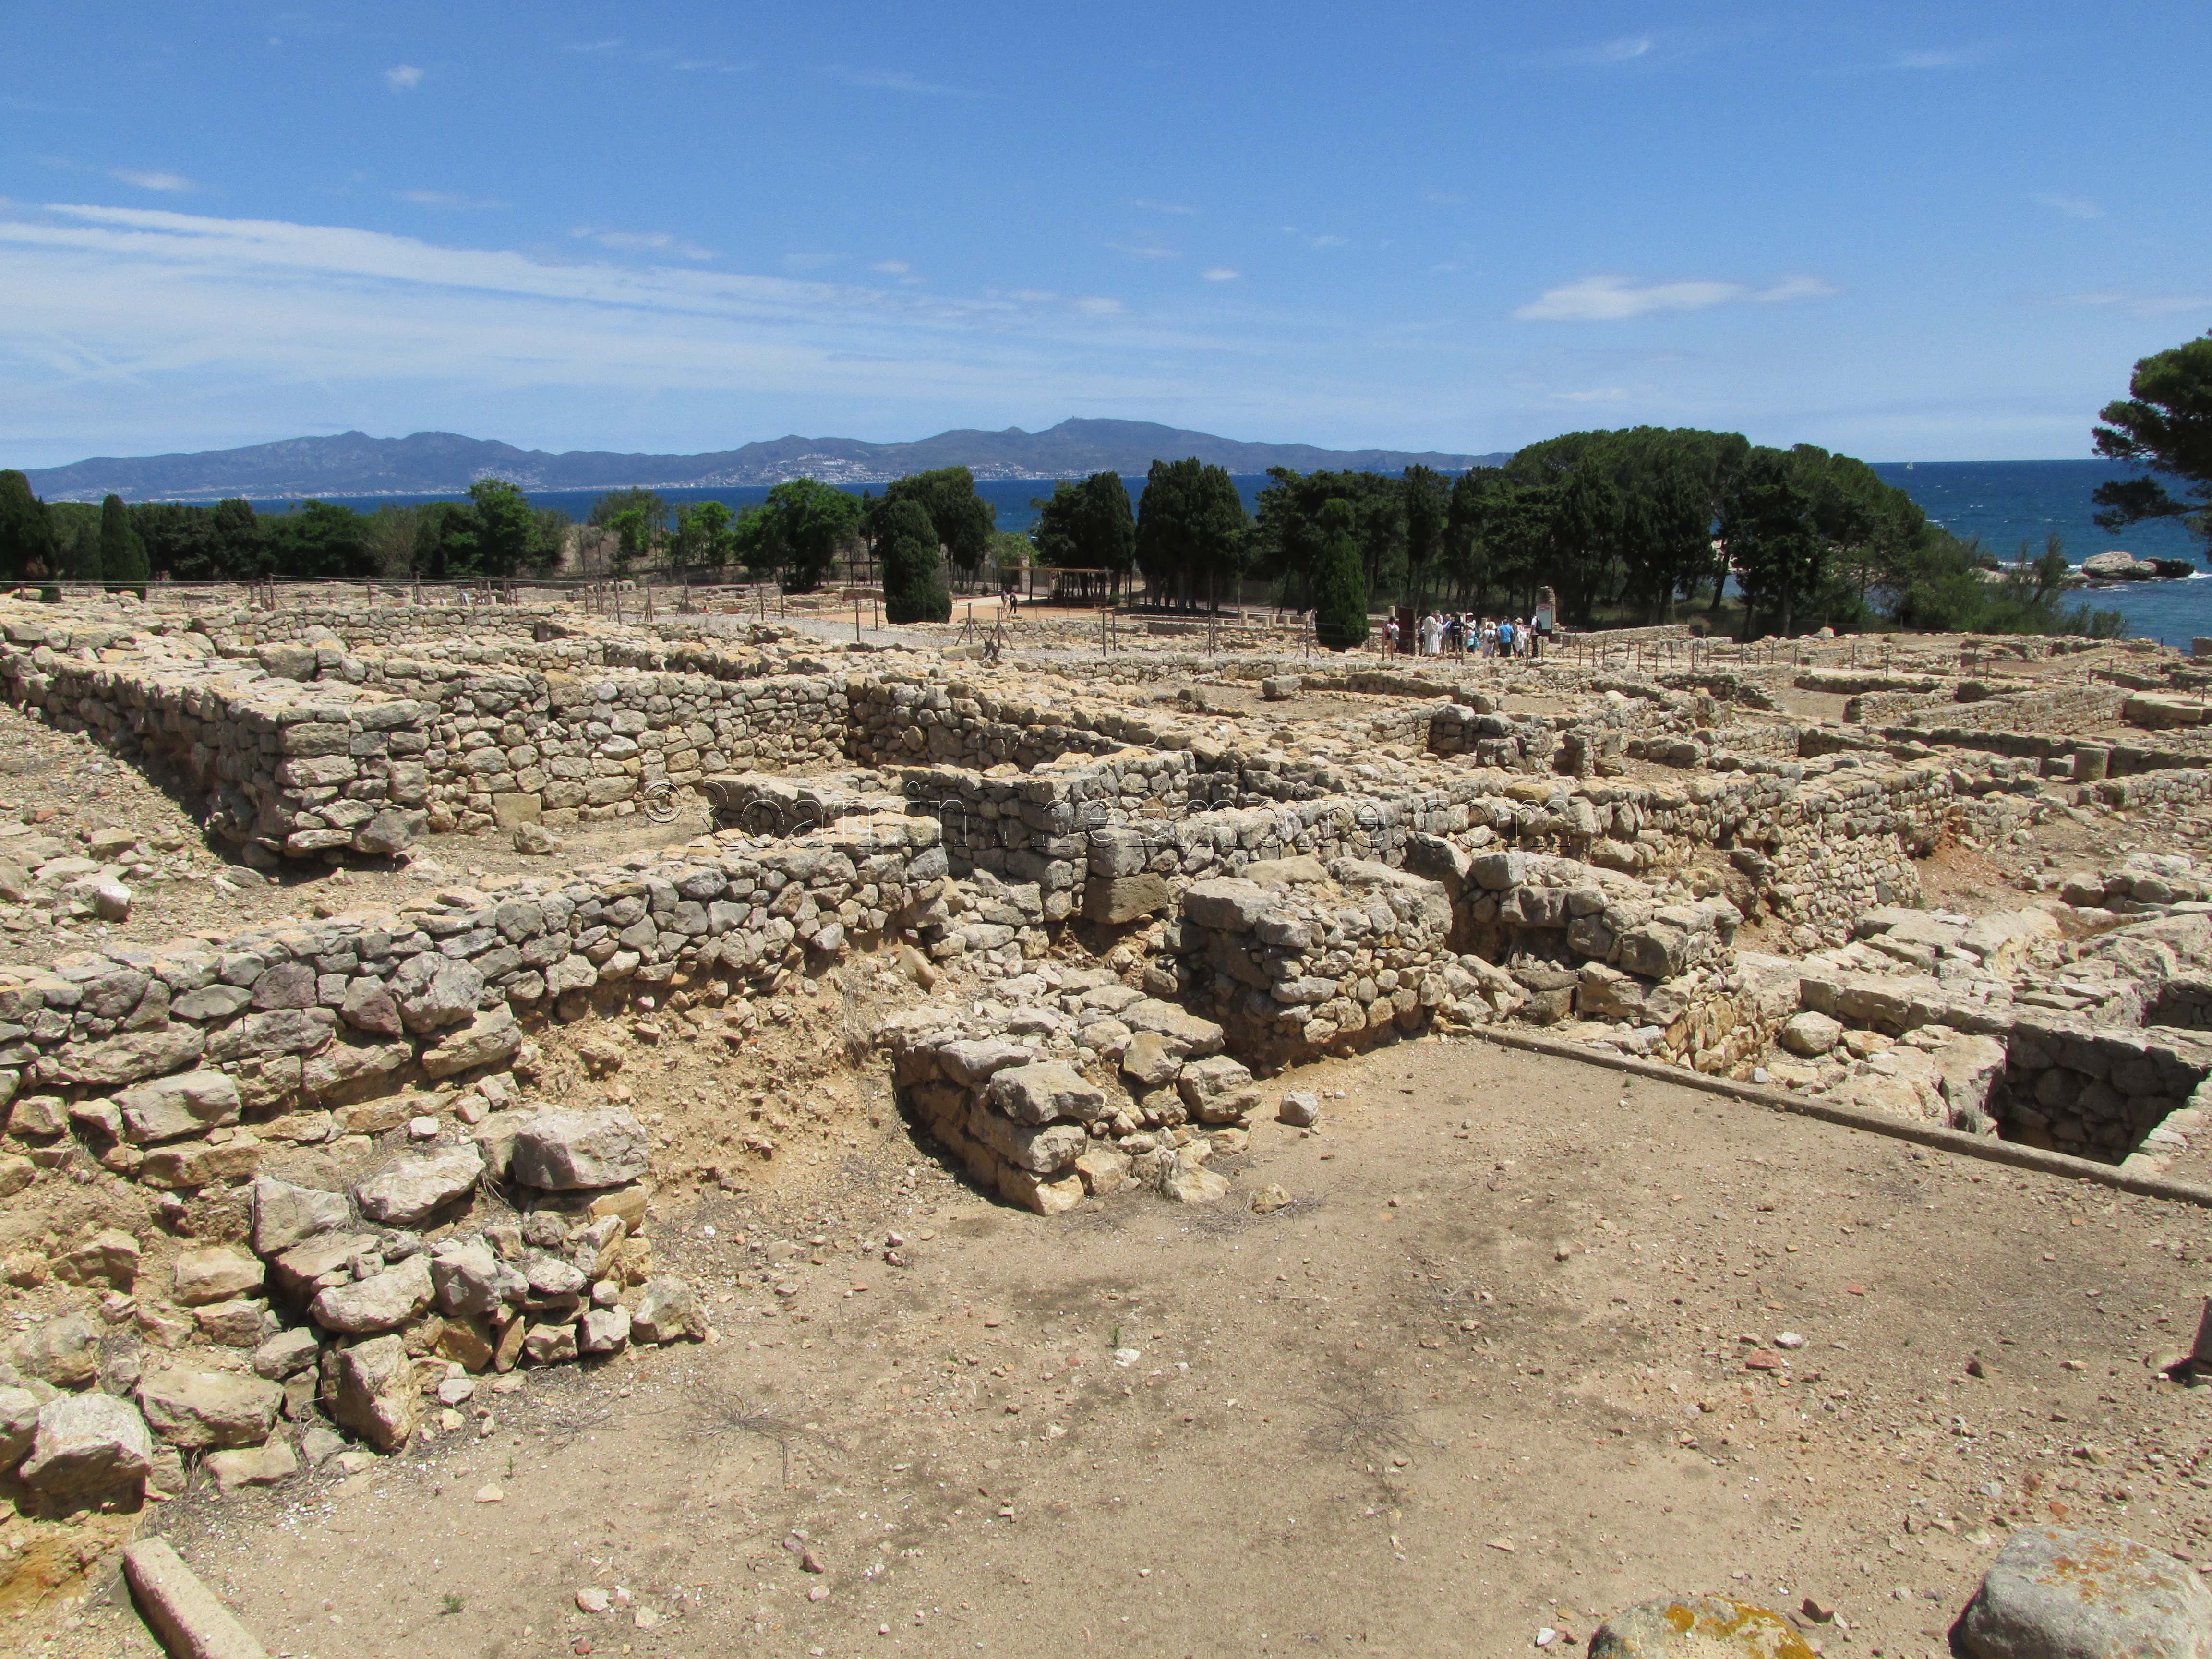 Northern portion of the Neapolis from the acropolis area. Emporiae. Emporion